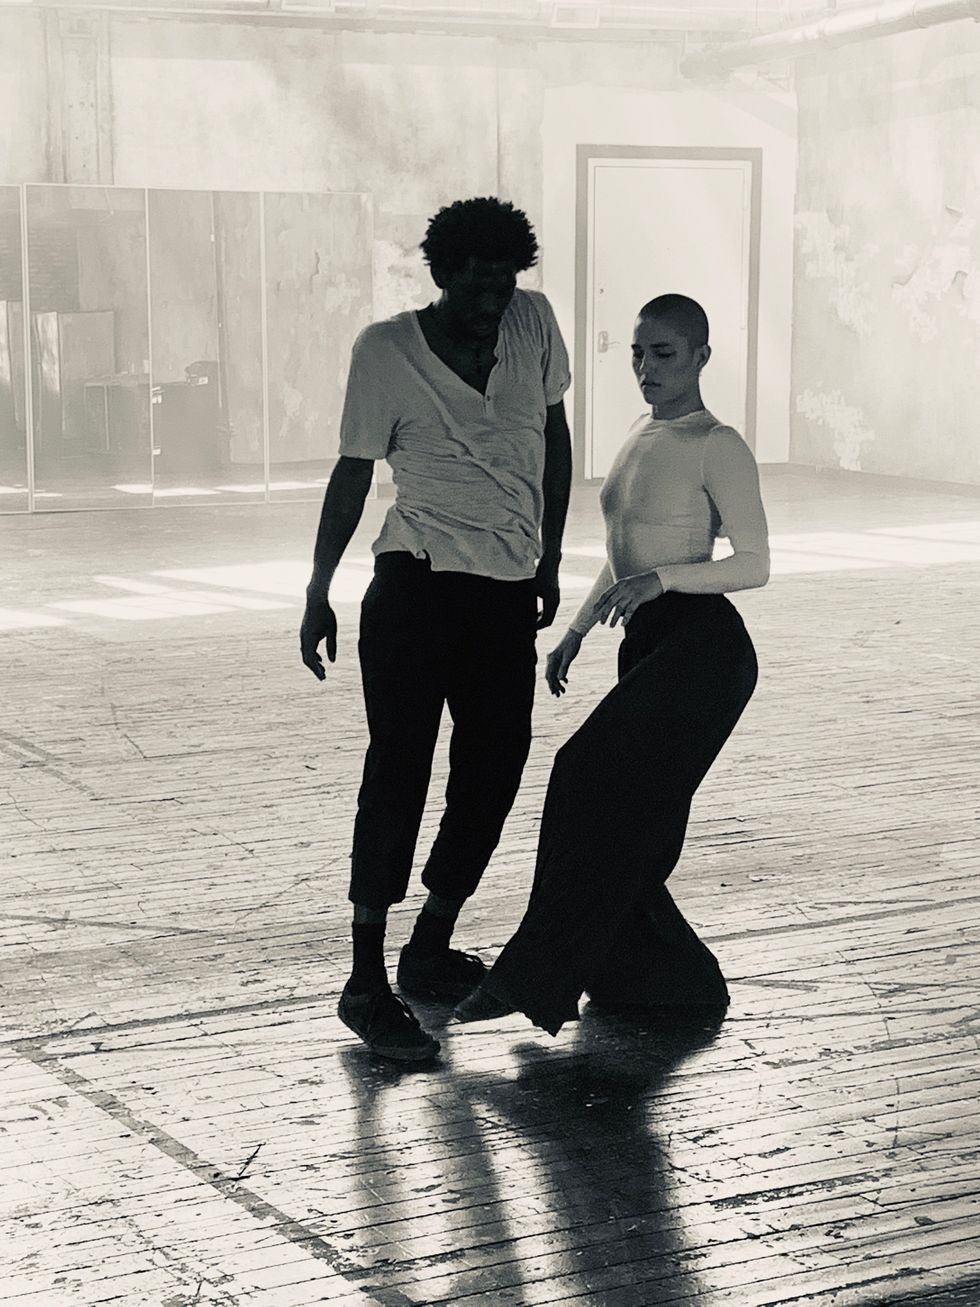 Black and white photo of two dancers moving close together but not touching in an empty warehouse-like room.